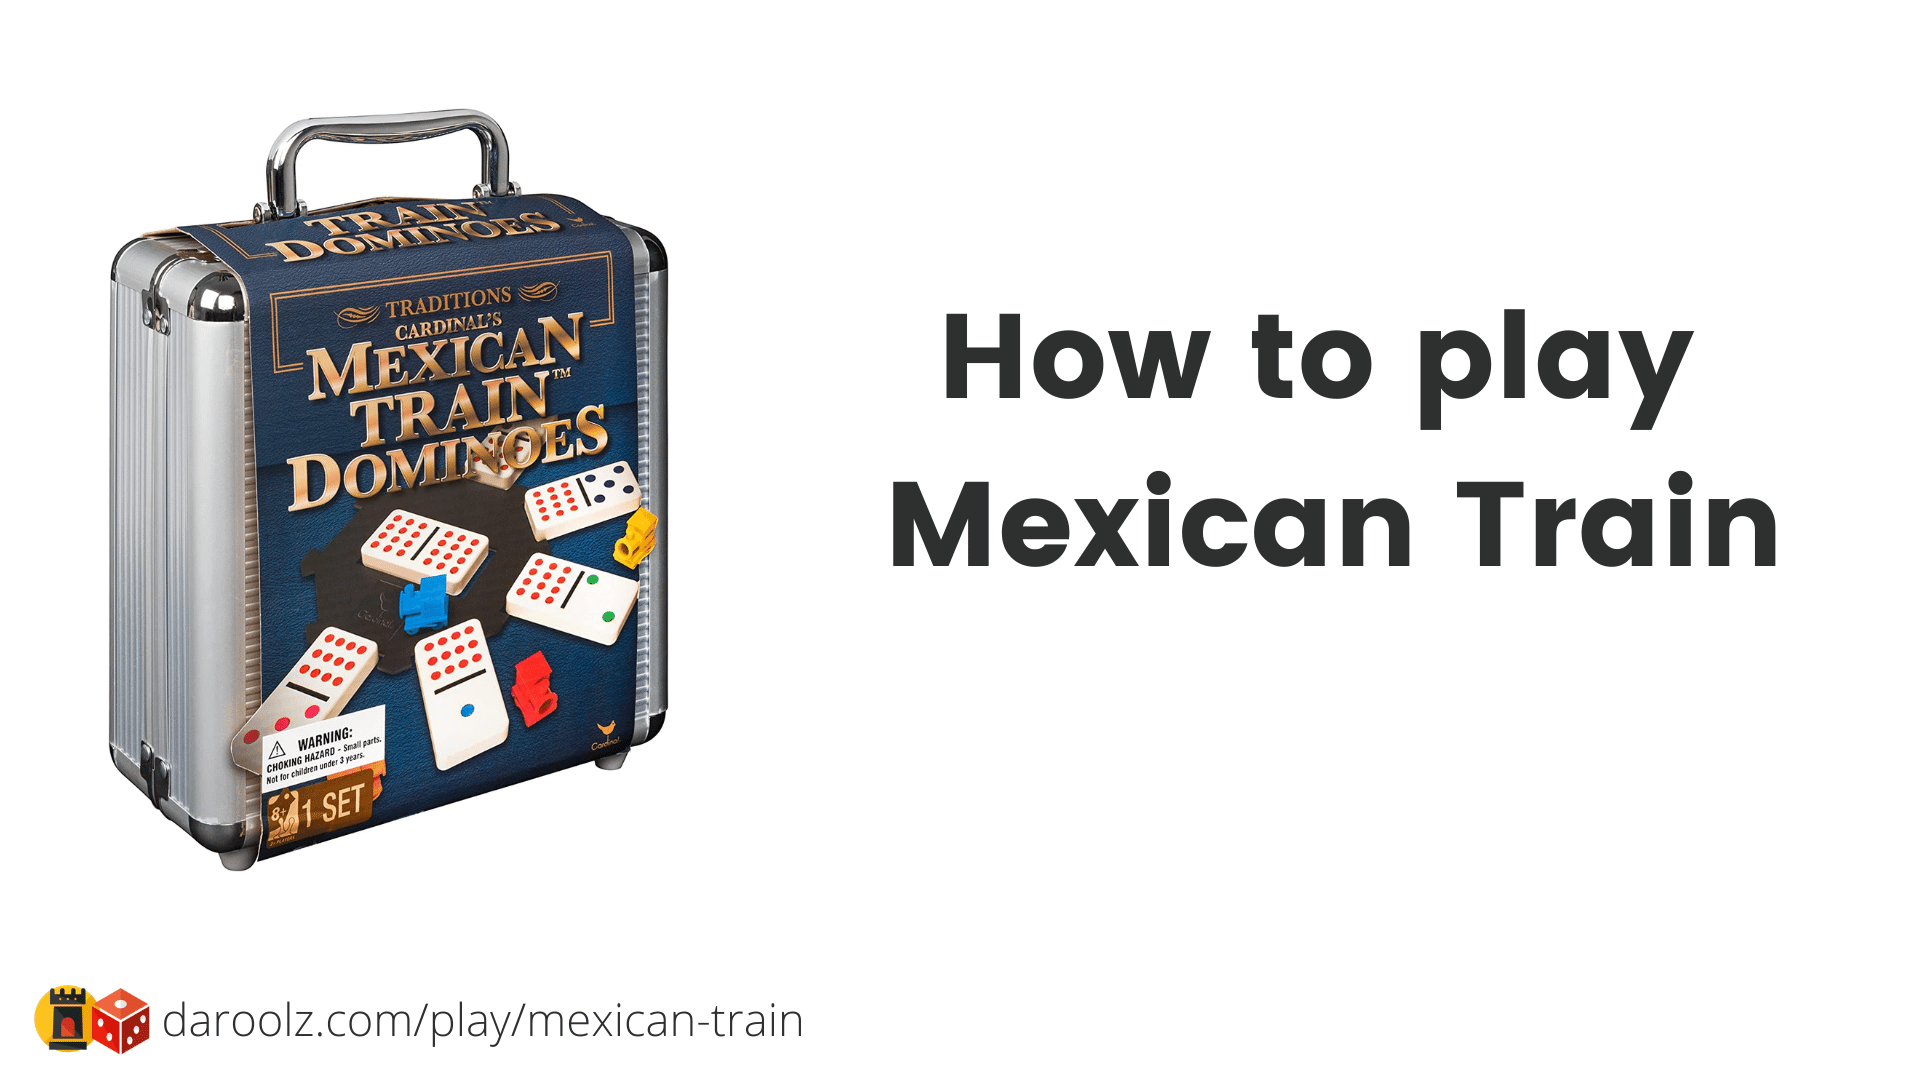 how to play Mexican train game rules